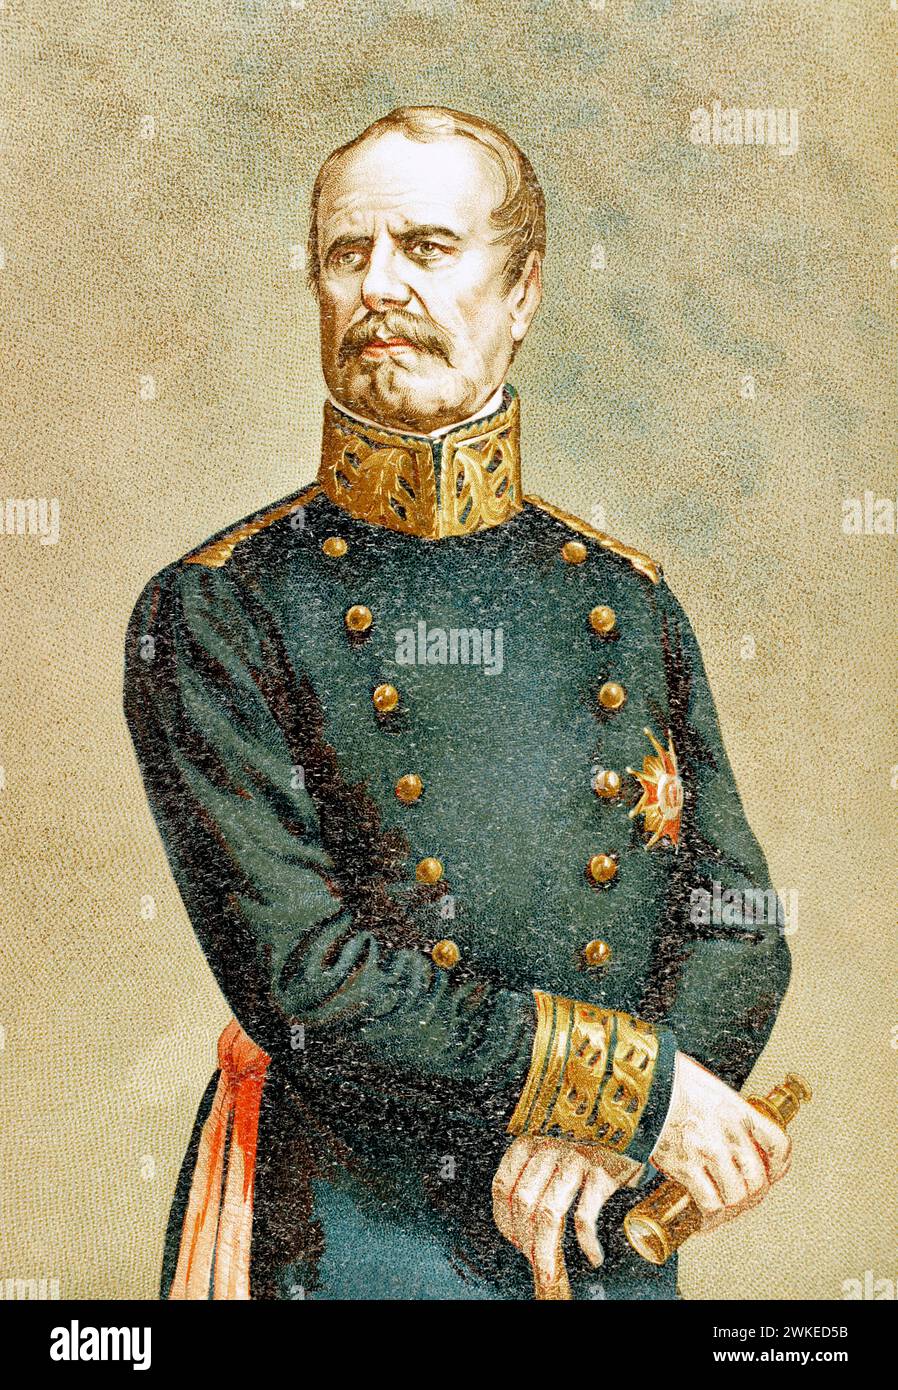 Rafael Maroto (1783-1847). Spanish military. He joined the troops of the pretender Carlos V (Carlos María Isidro de Borbón) in the First Carlist War. Together with Espartero, he starred in the Embrace of Vergara (August 31, 1839) which ended the conflict. Portrait. Chromolithography. 'Historia de la Guerra Civil y de los Partidos Liberal y Carlista' (History of the Civil War and the Liberal and Carlist parties). Volume III. 1891. Stock Photo